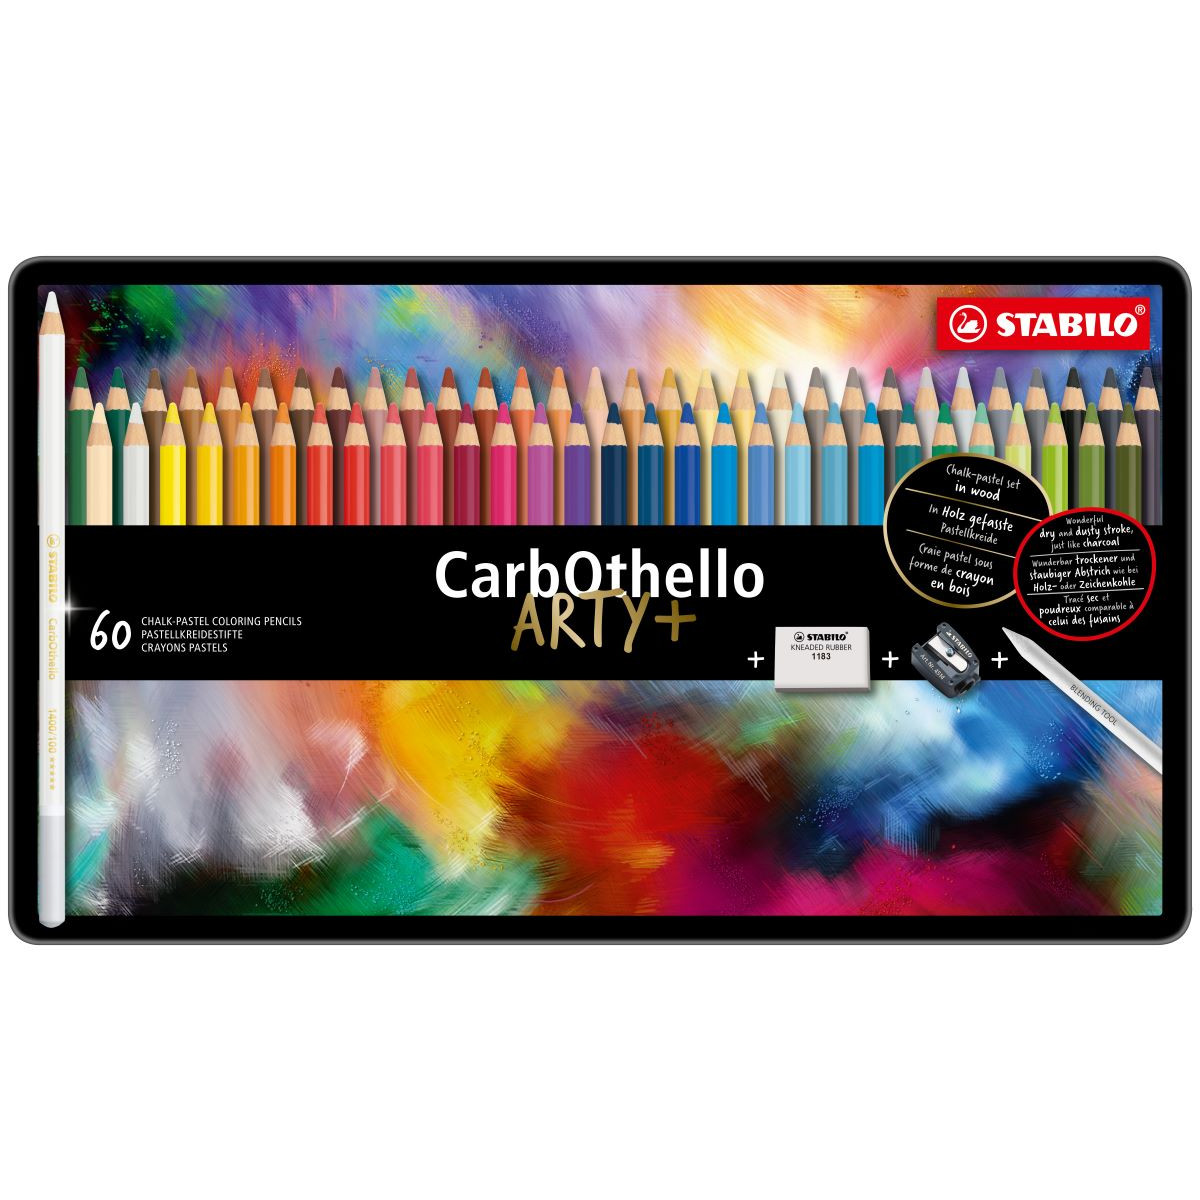 STABILO Carbothello Colouring Pencils - ARTY- Assorted Colours (Tin of 60)